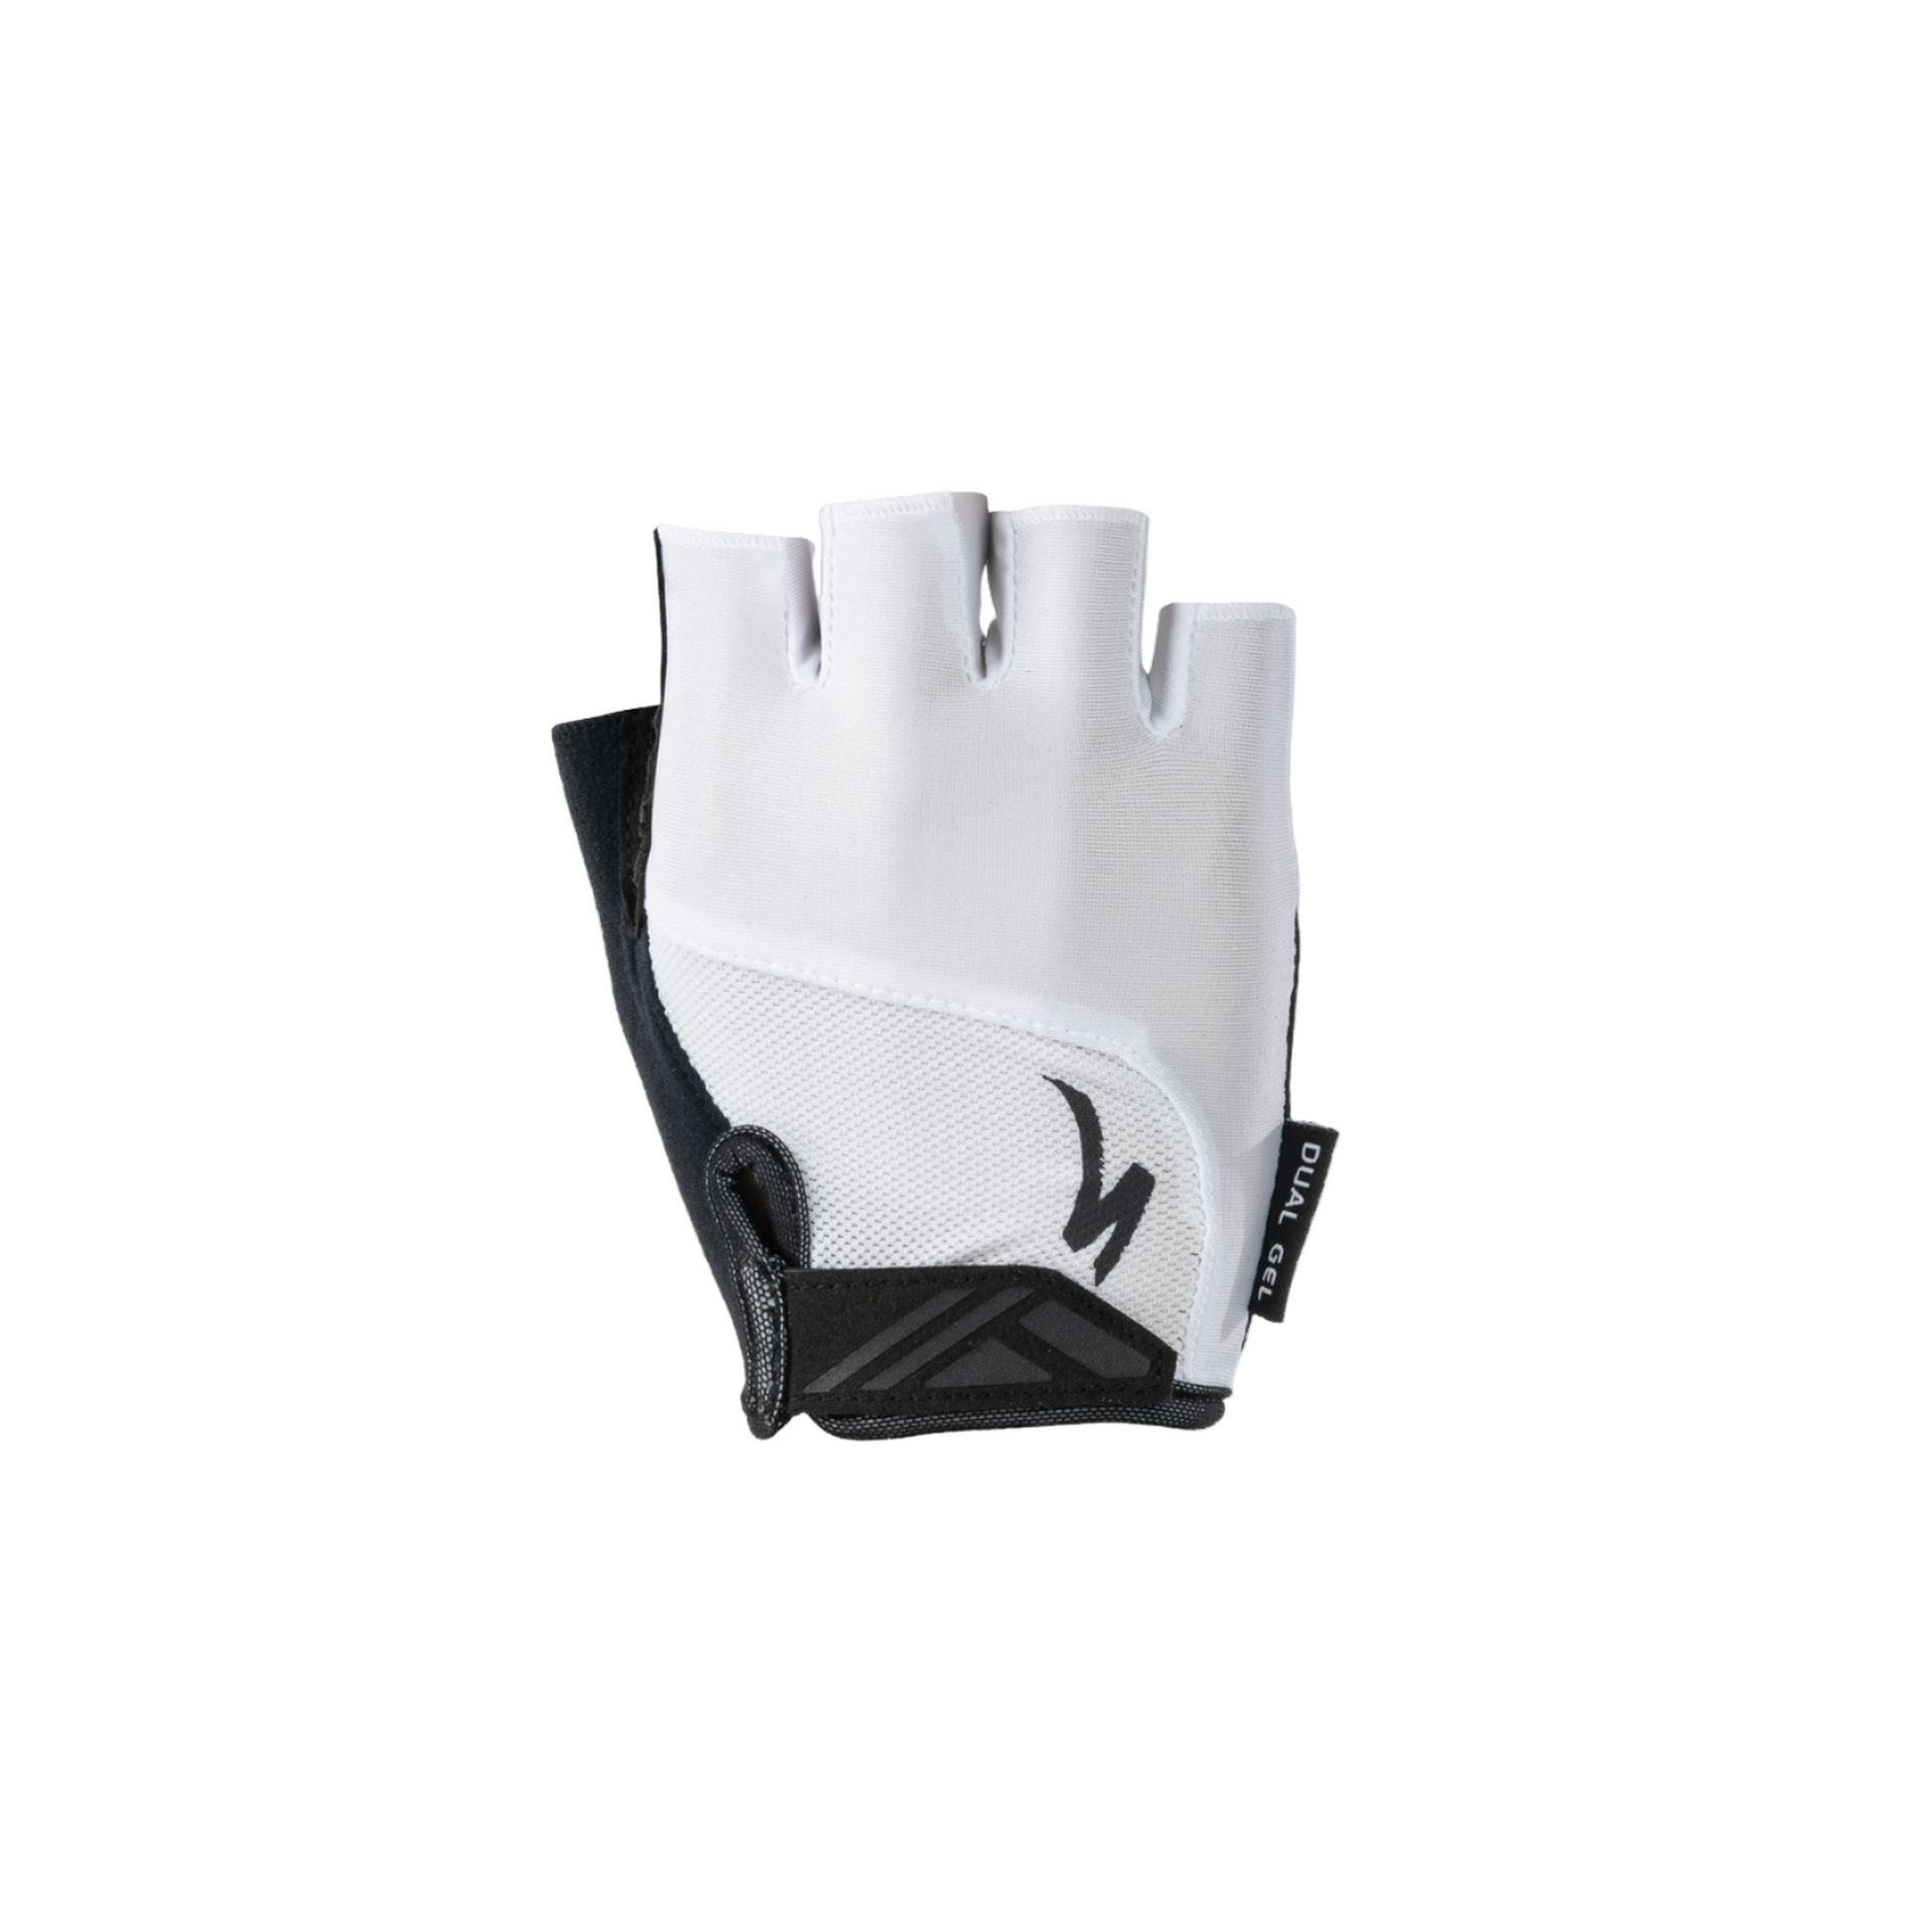 Men's Body Geometry Dual-Gel Short Finger Gloves | Complete Cyclist - Our Body Geometry Dual-Gel gloves are all about comfort. They feature strategically placed gel pads throughout the palm to alleviate hand fatigue by relieving